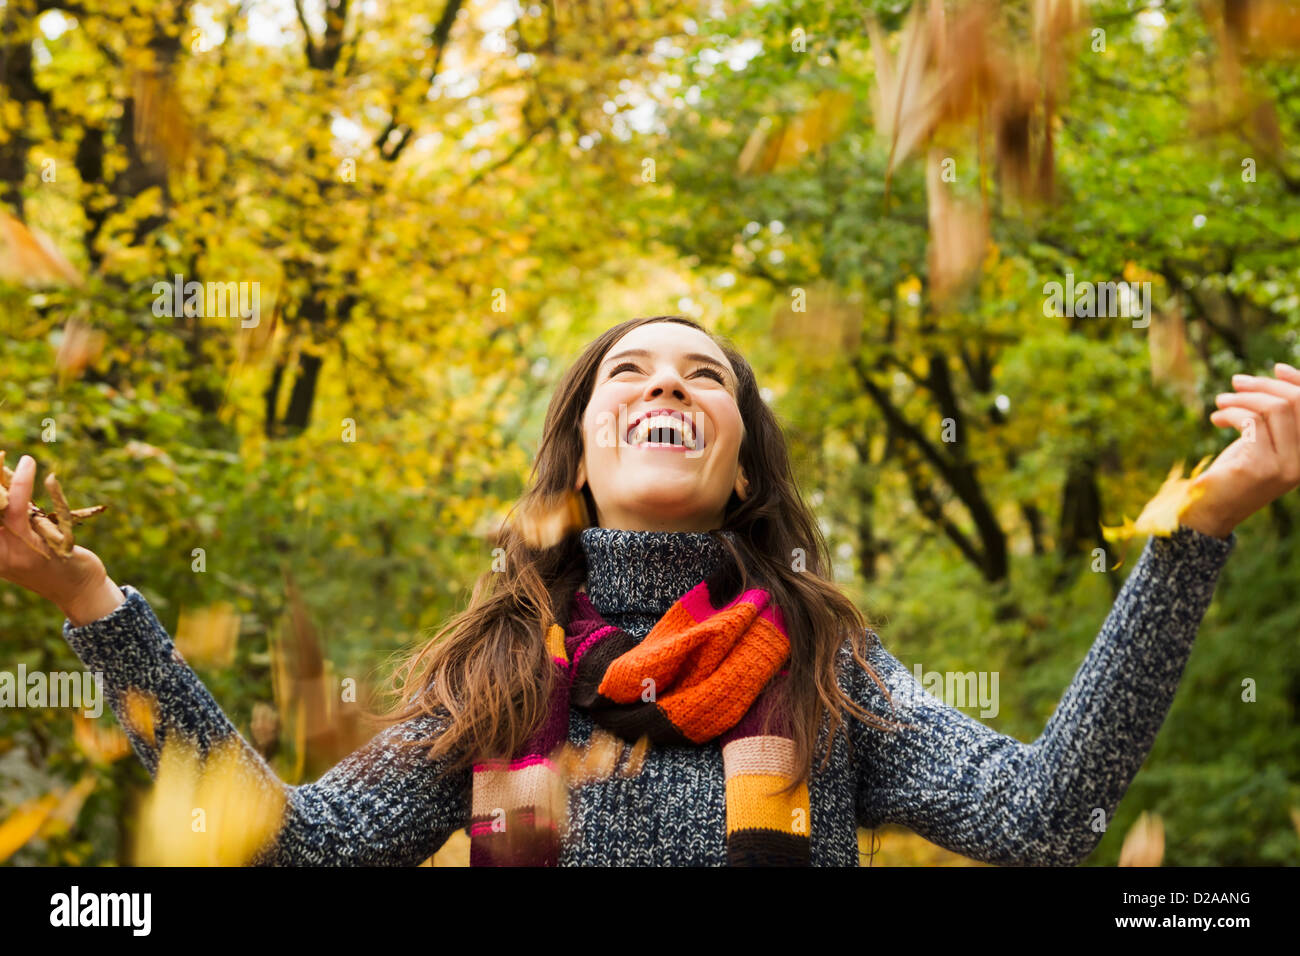 Woman playing in autumn leaves Stock Photo